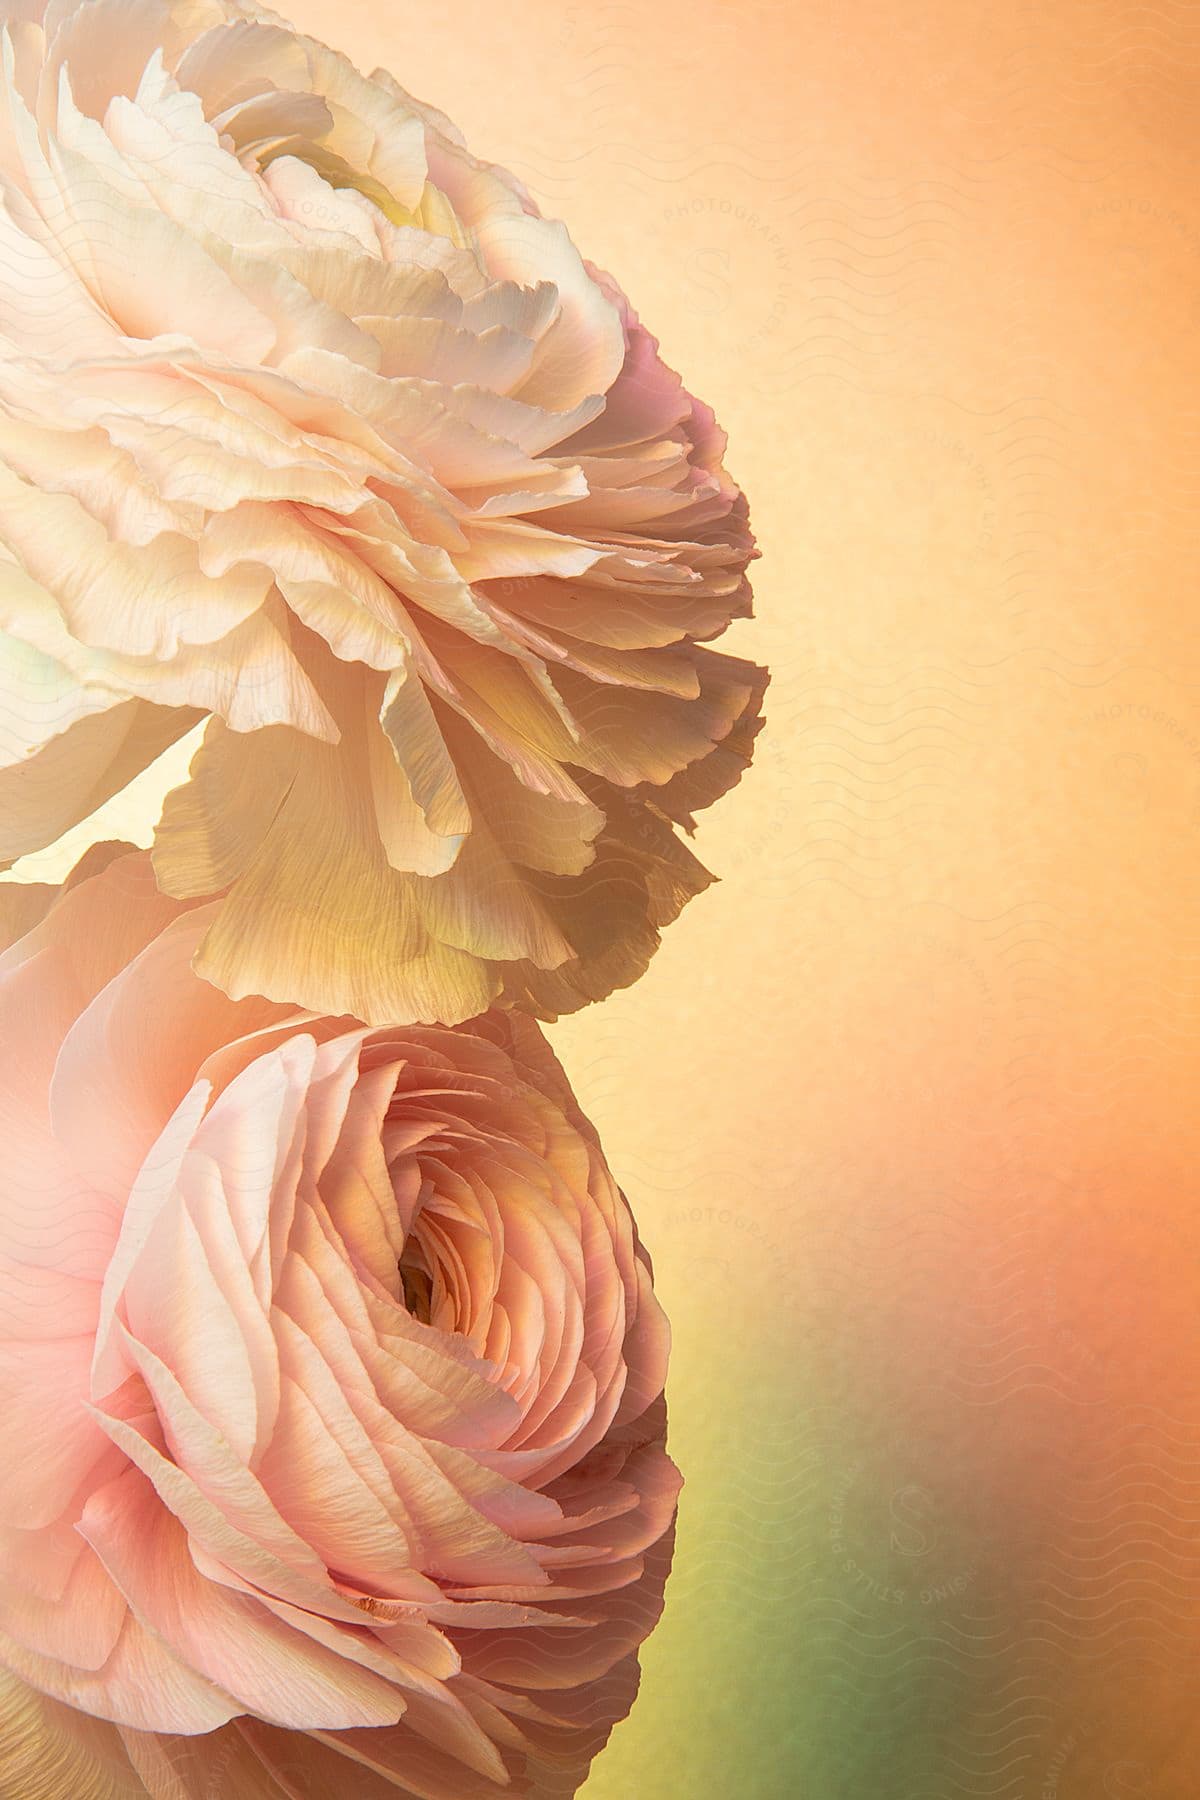 Two flowers of white and pink tones with several layers of petals on a colorful background